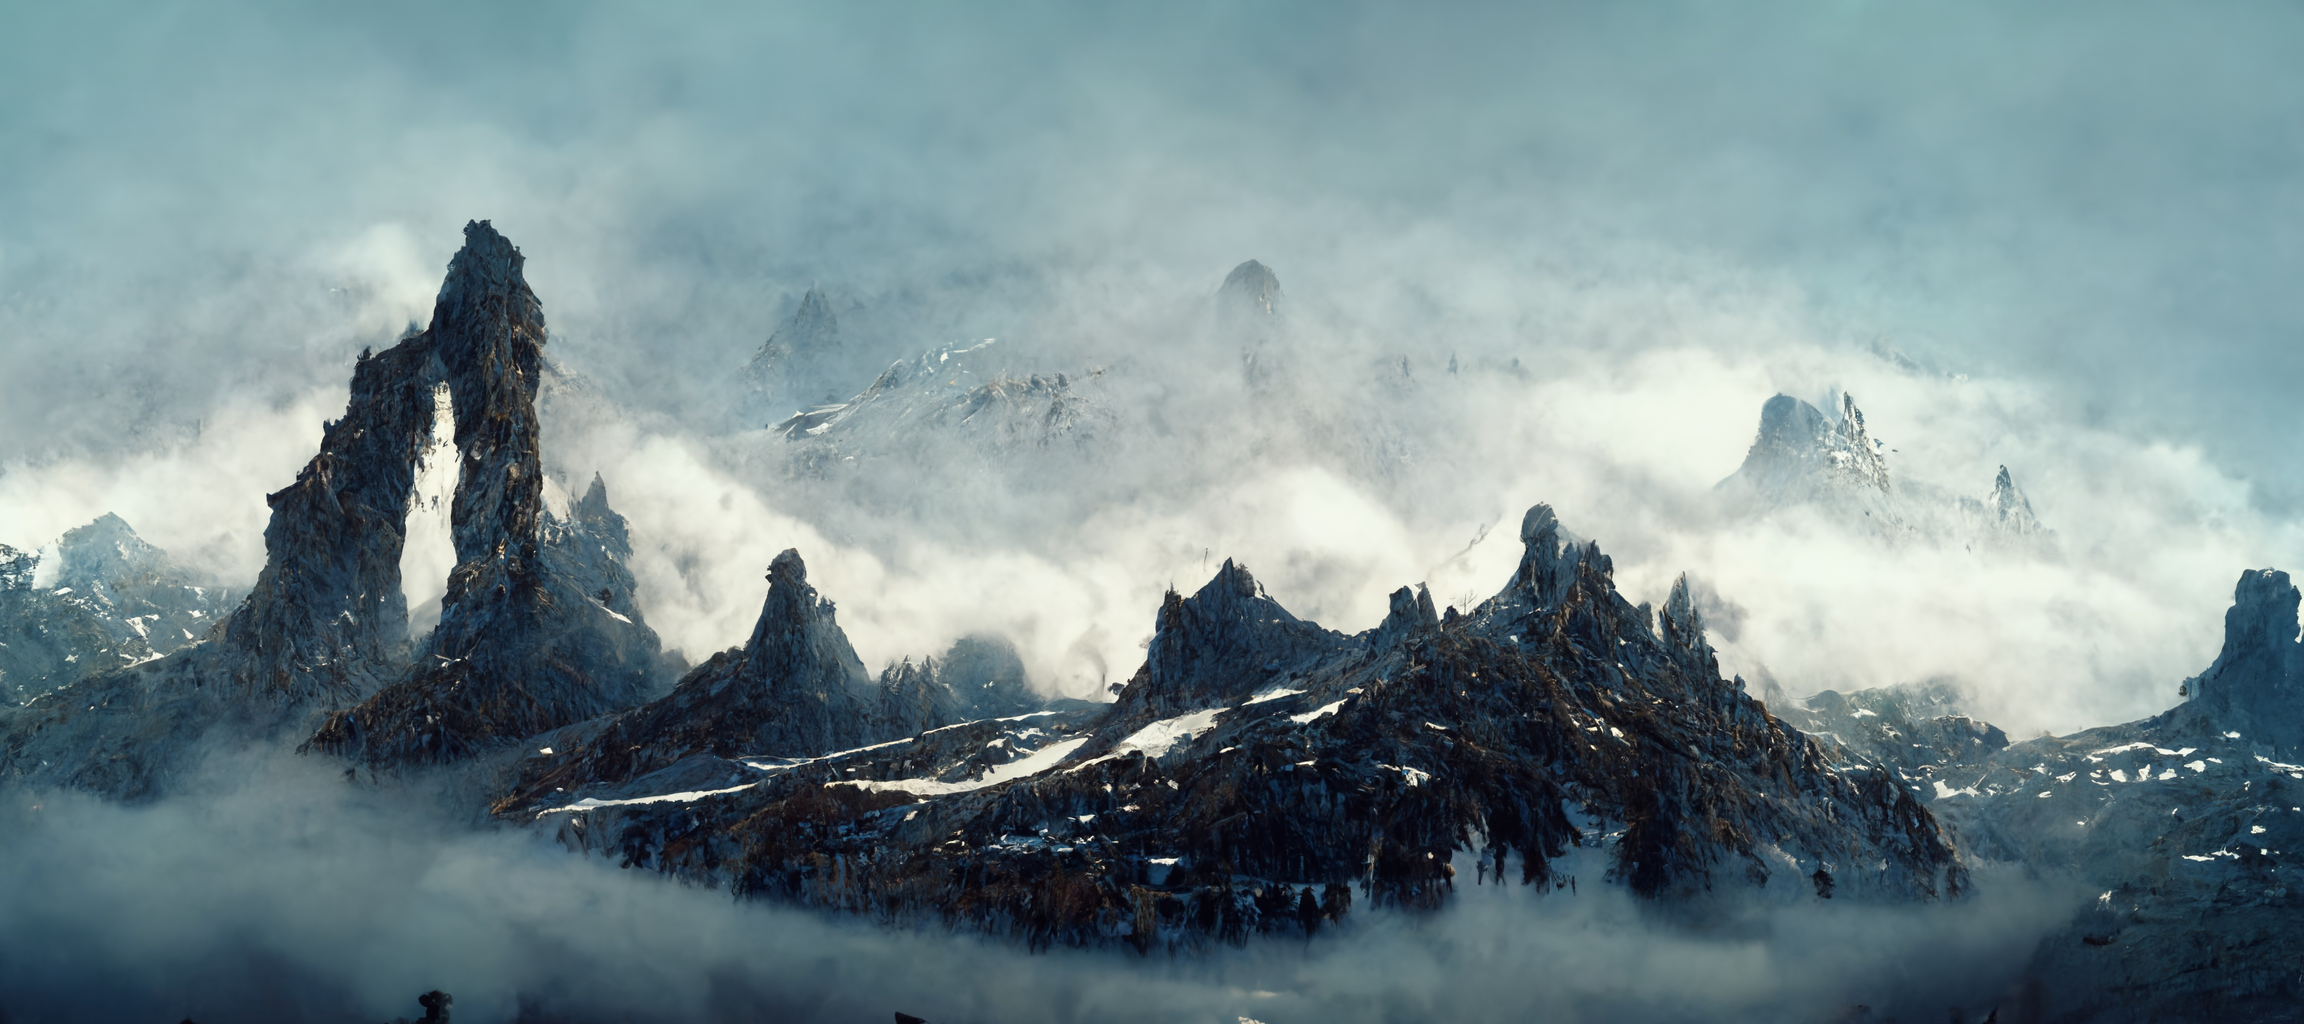 vibe_french_alps_mountains_giant_monster_mist_spooky_photoreali_88126105-cace-49c8-968d-5c8c7a345907